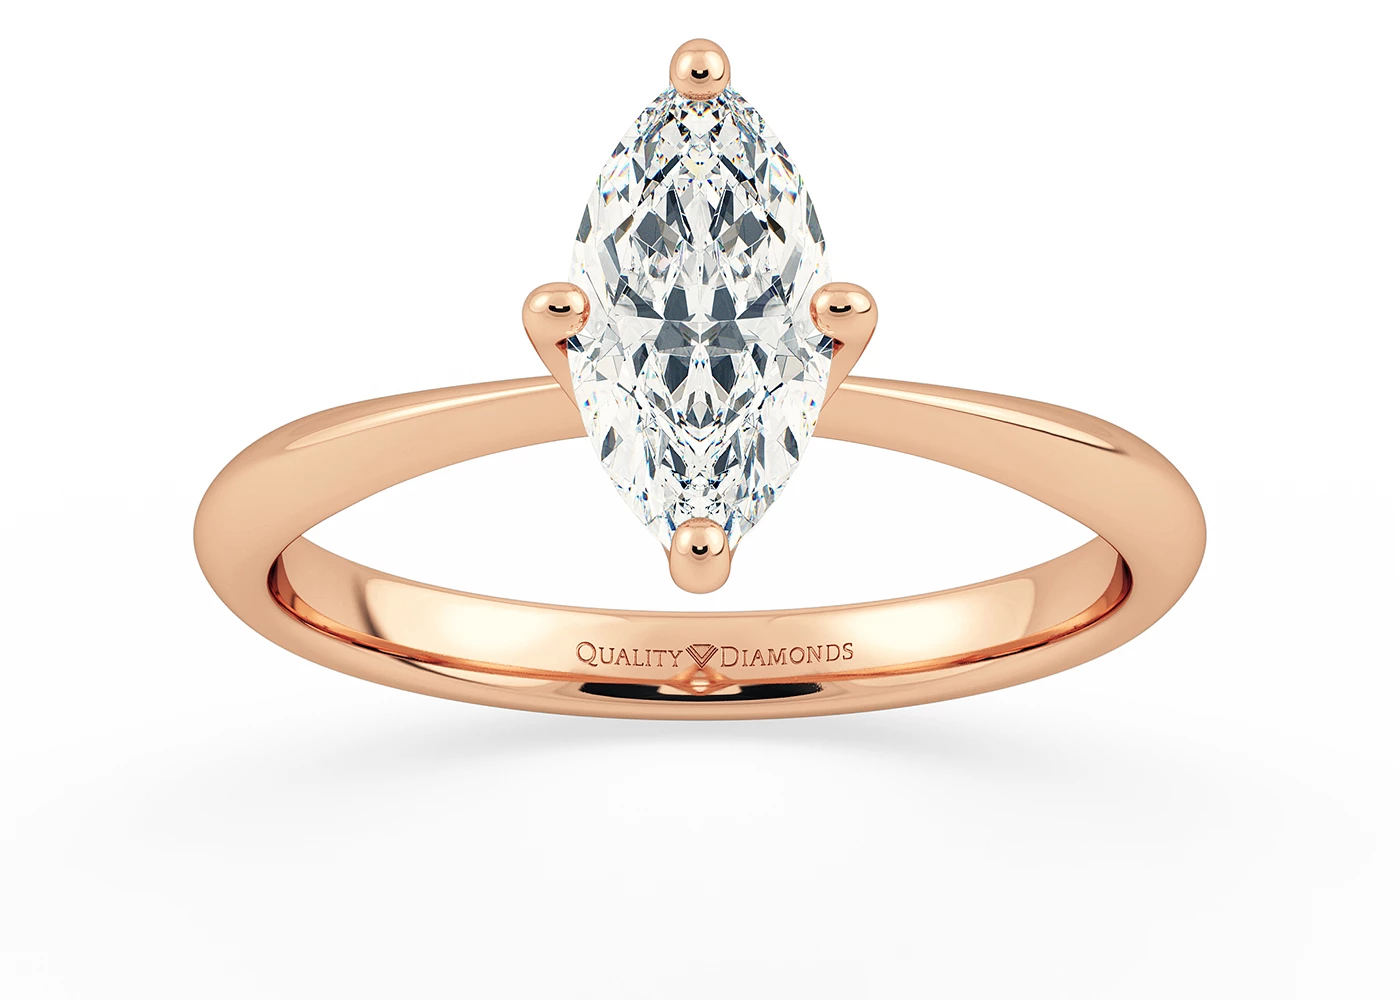 Two Carat Marquise Solitaire Diamond Engagement Ring in 18K Rose Gold